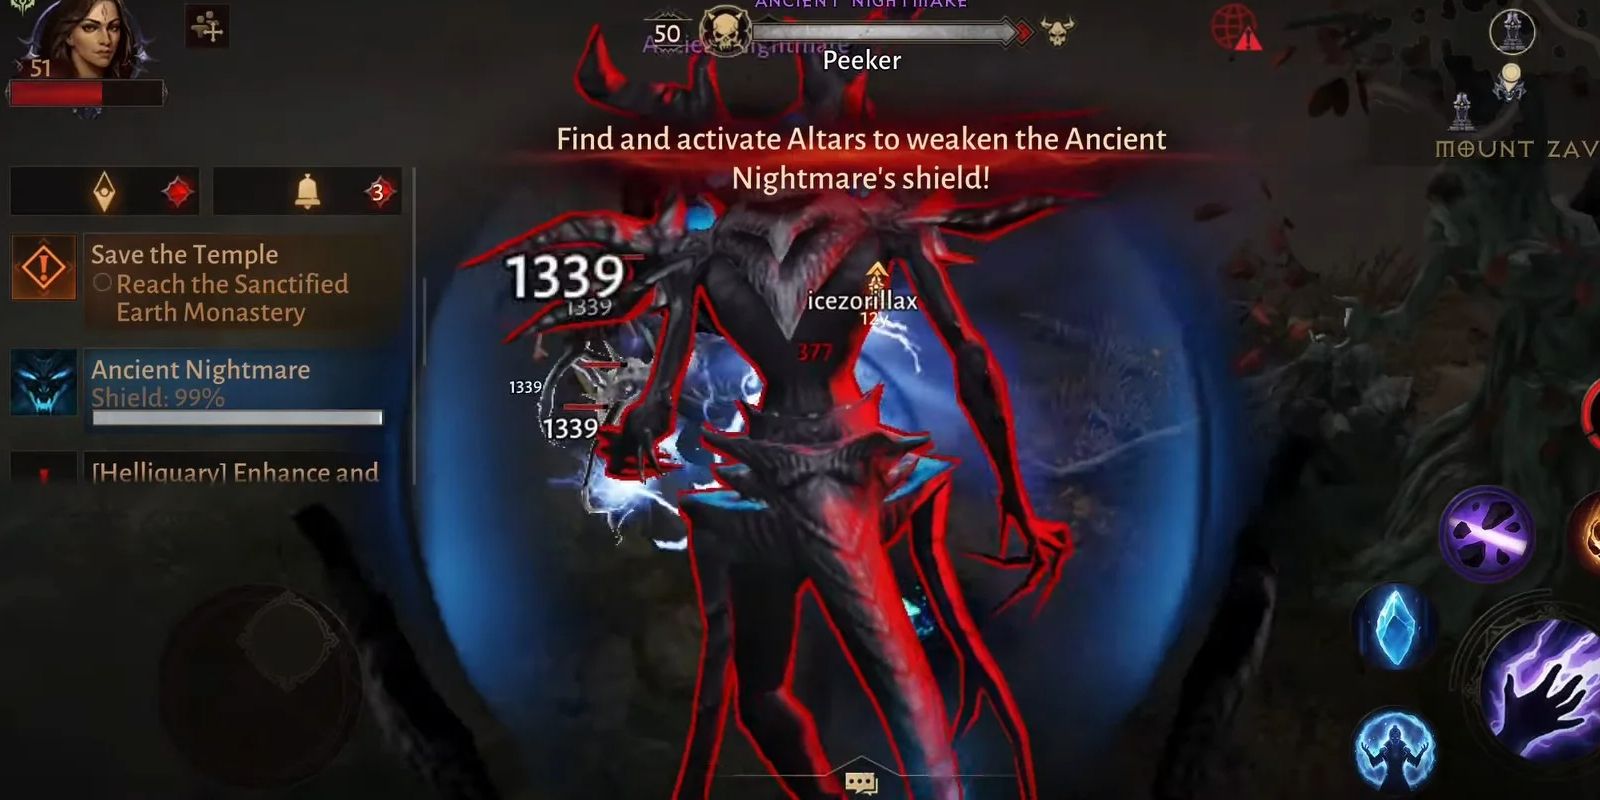 How To Complete The Ancient Nightmare Event in Diablo Immortal Boss Shield